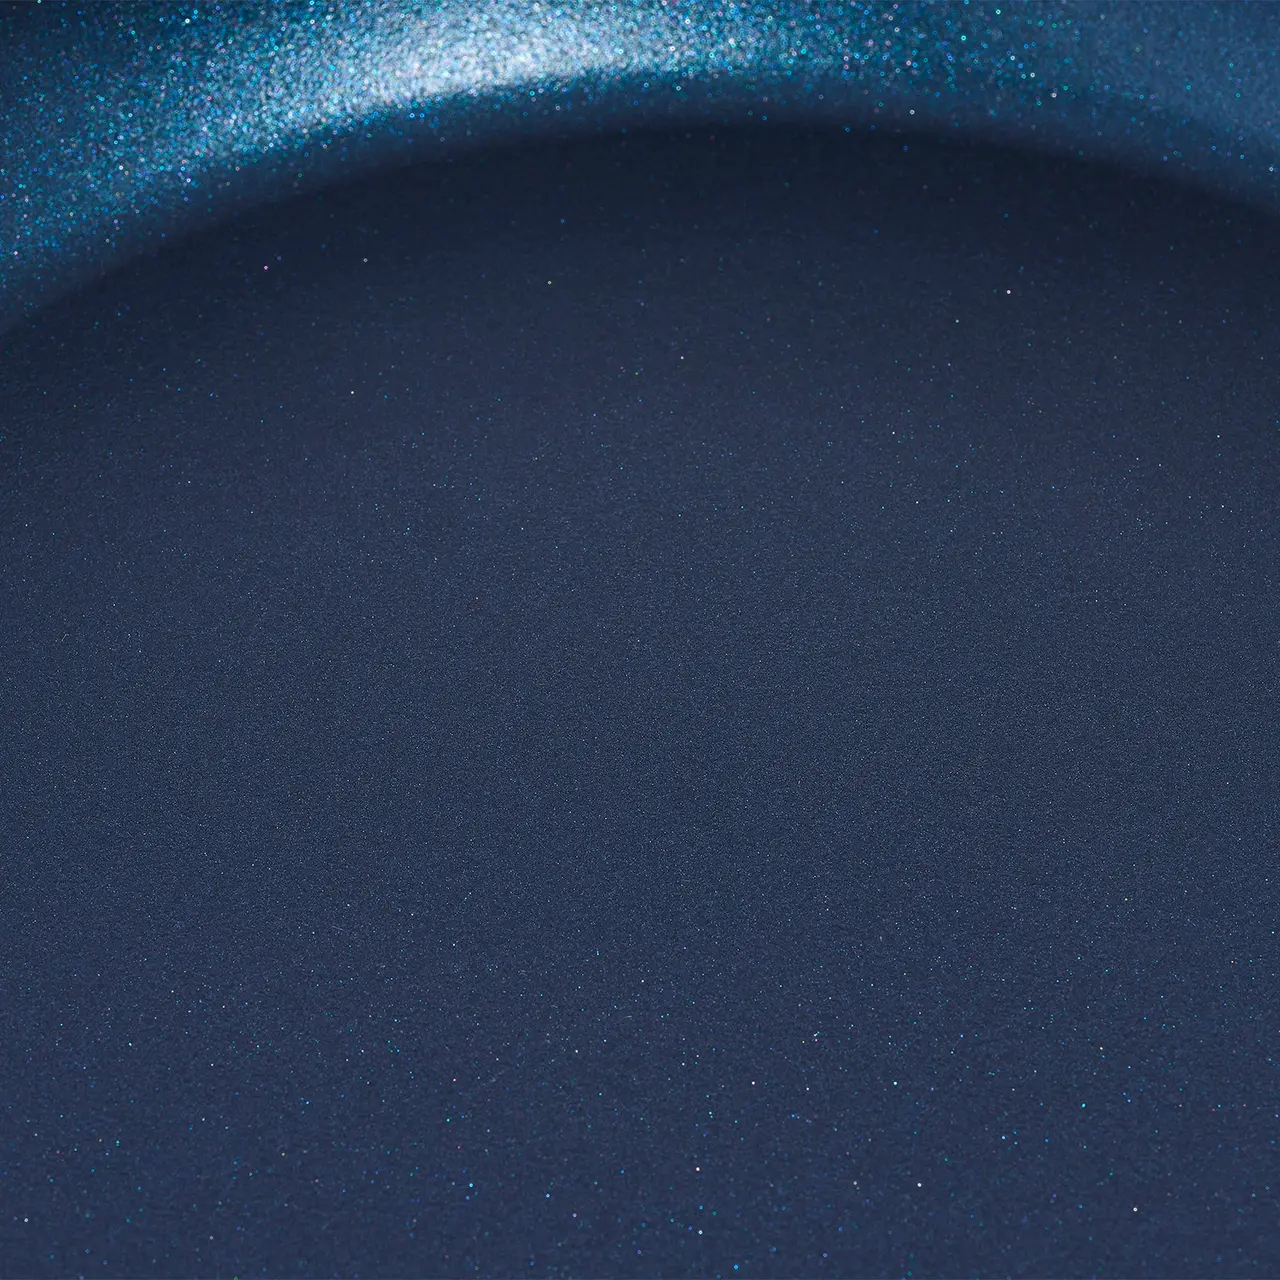 A close-up of a blue object with a smooth texture and subtle sparkle, resembling either a polished stone or a piece of colored glass.